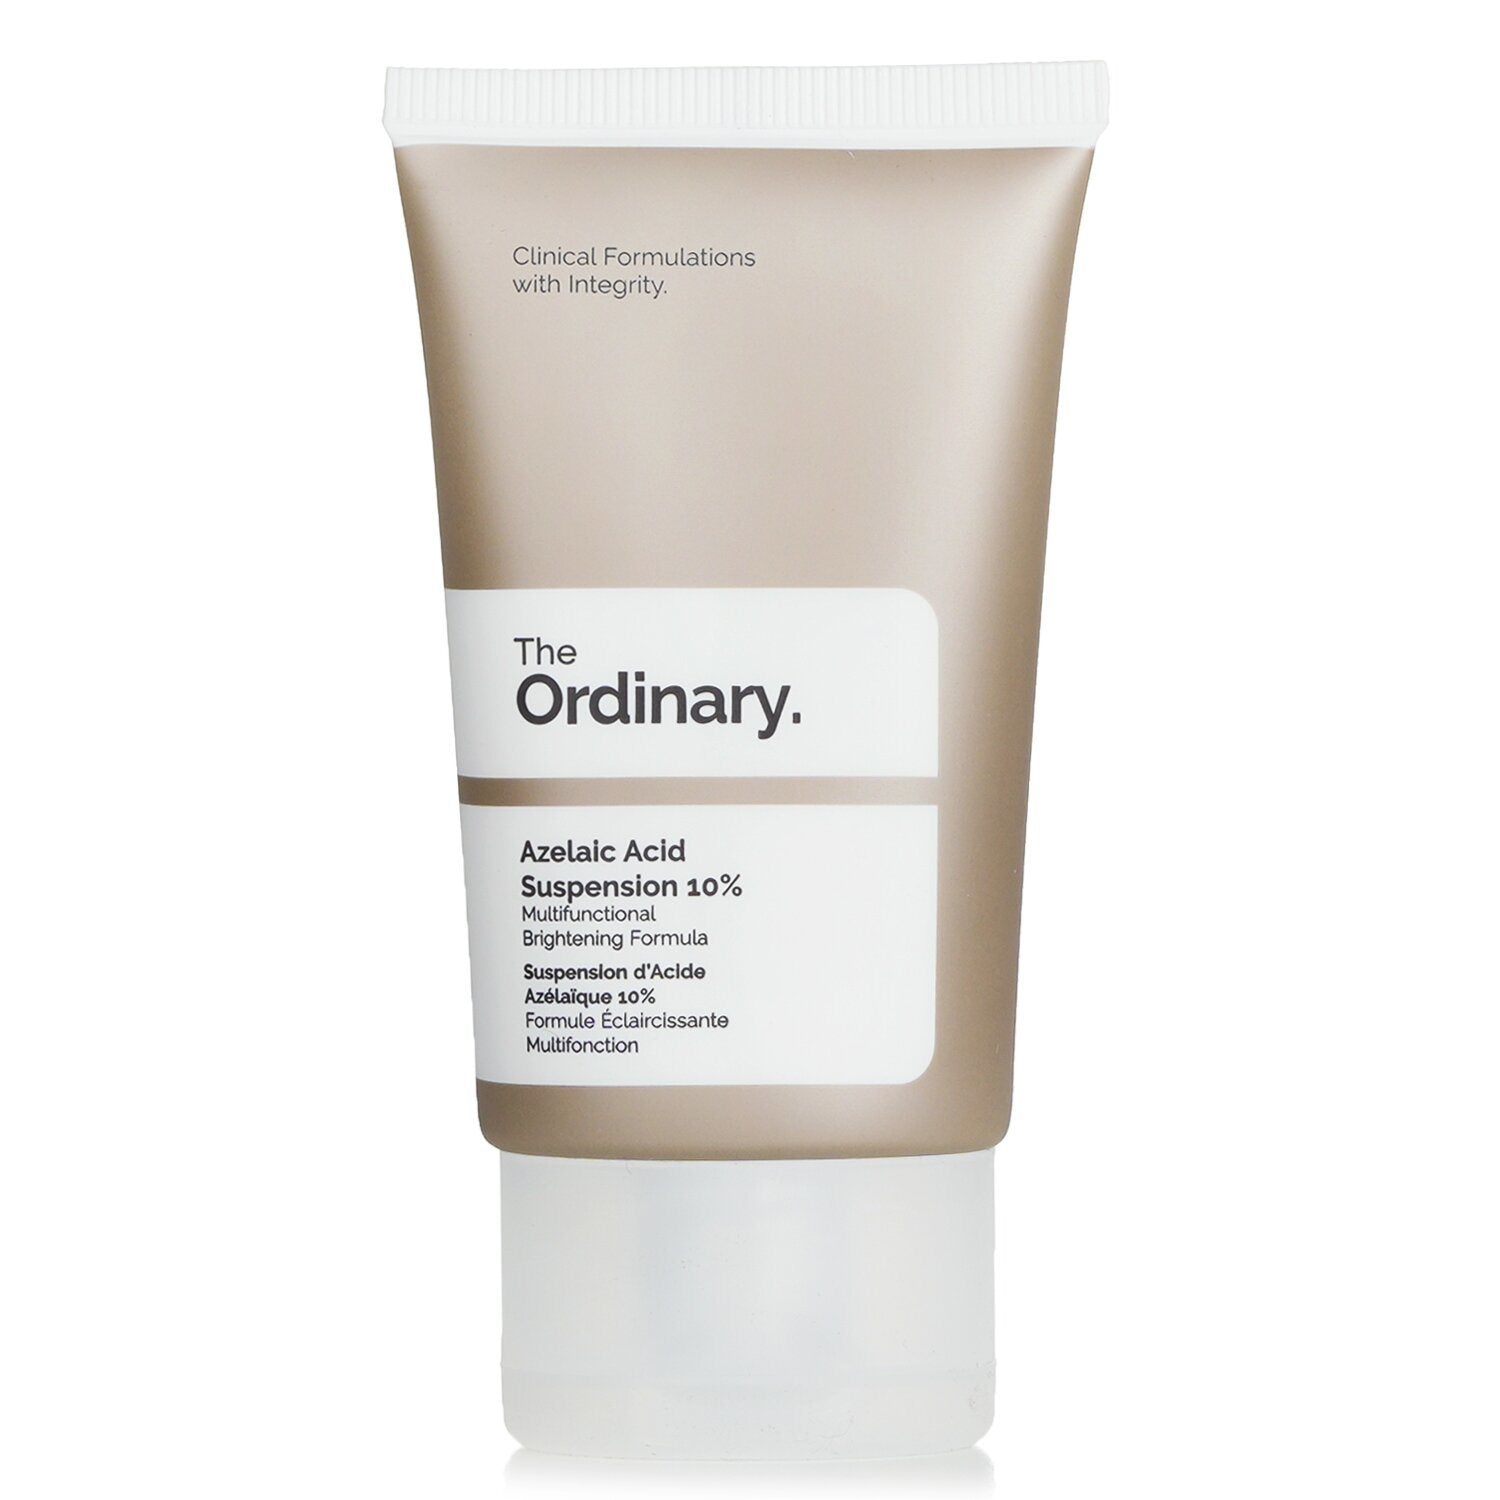 The Ordinary - Azelaic Acid Suspension 10% 190588 30ml/1oz is a brightening solution for uneven and blemish-prone skin.